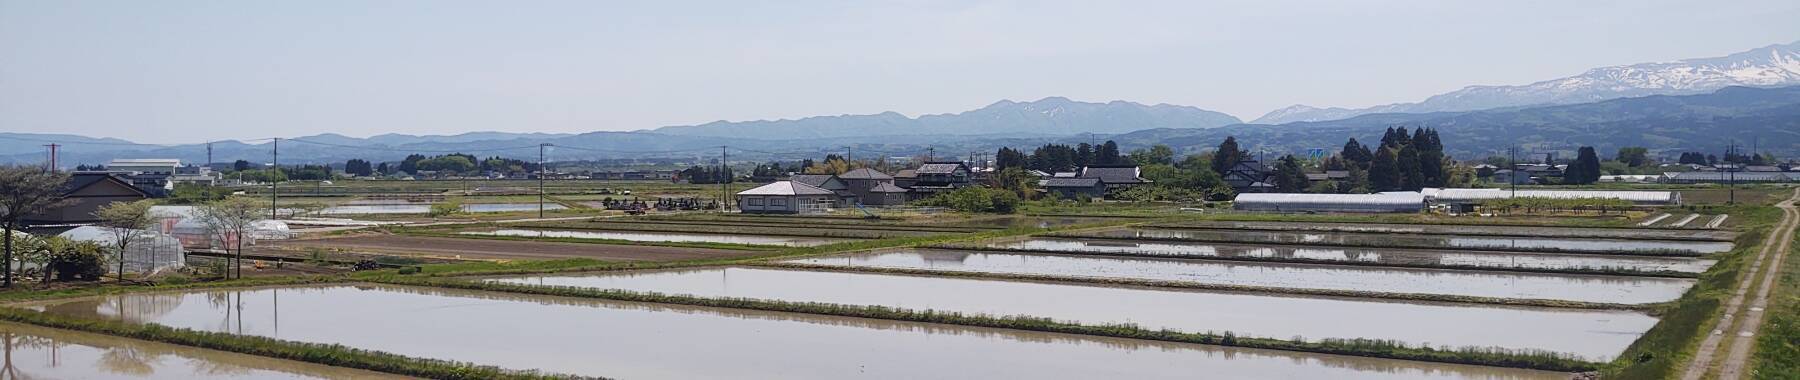 Rice paddies and vegetable greenhouses with mountains, some with snow cover, in the distance.